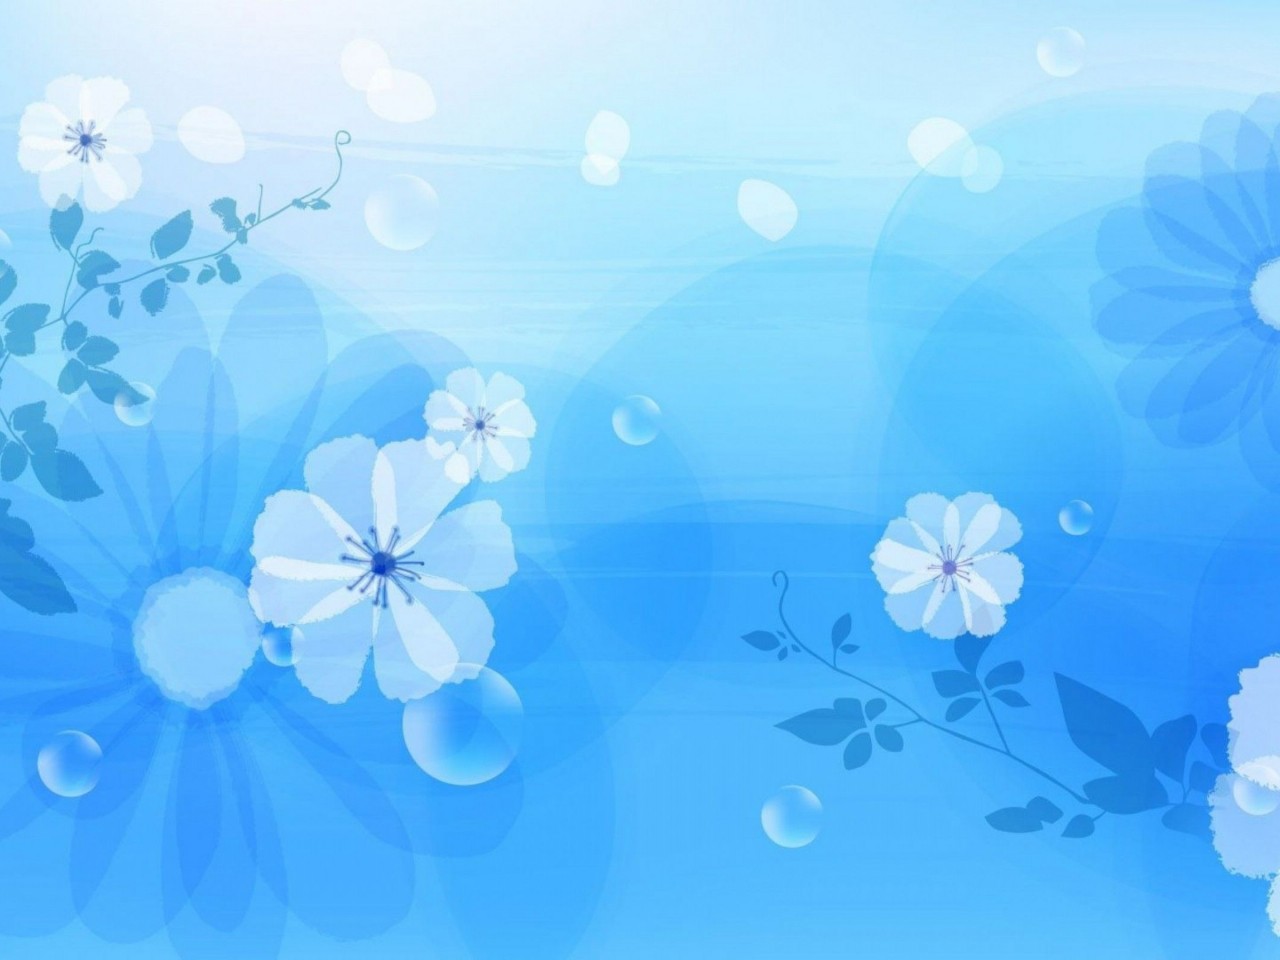 Blue Flowers Backgrounds Related Keywords amp Suggestions